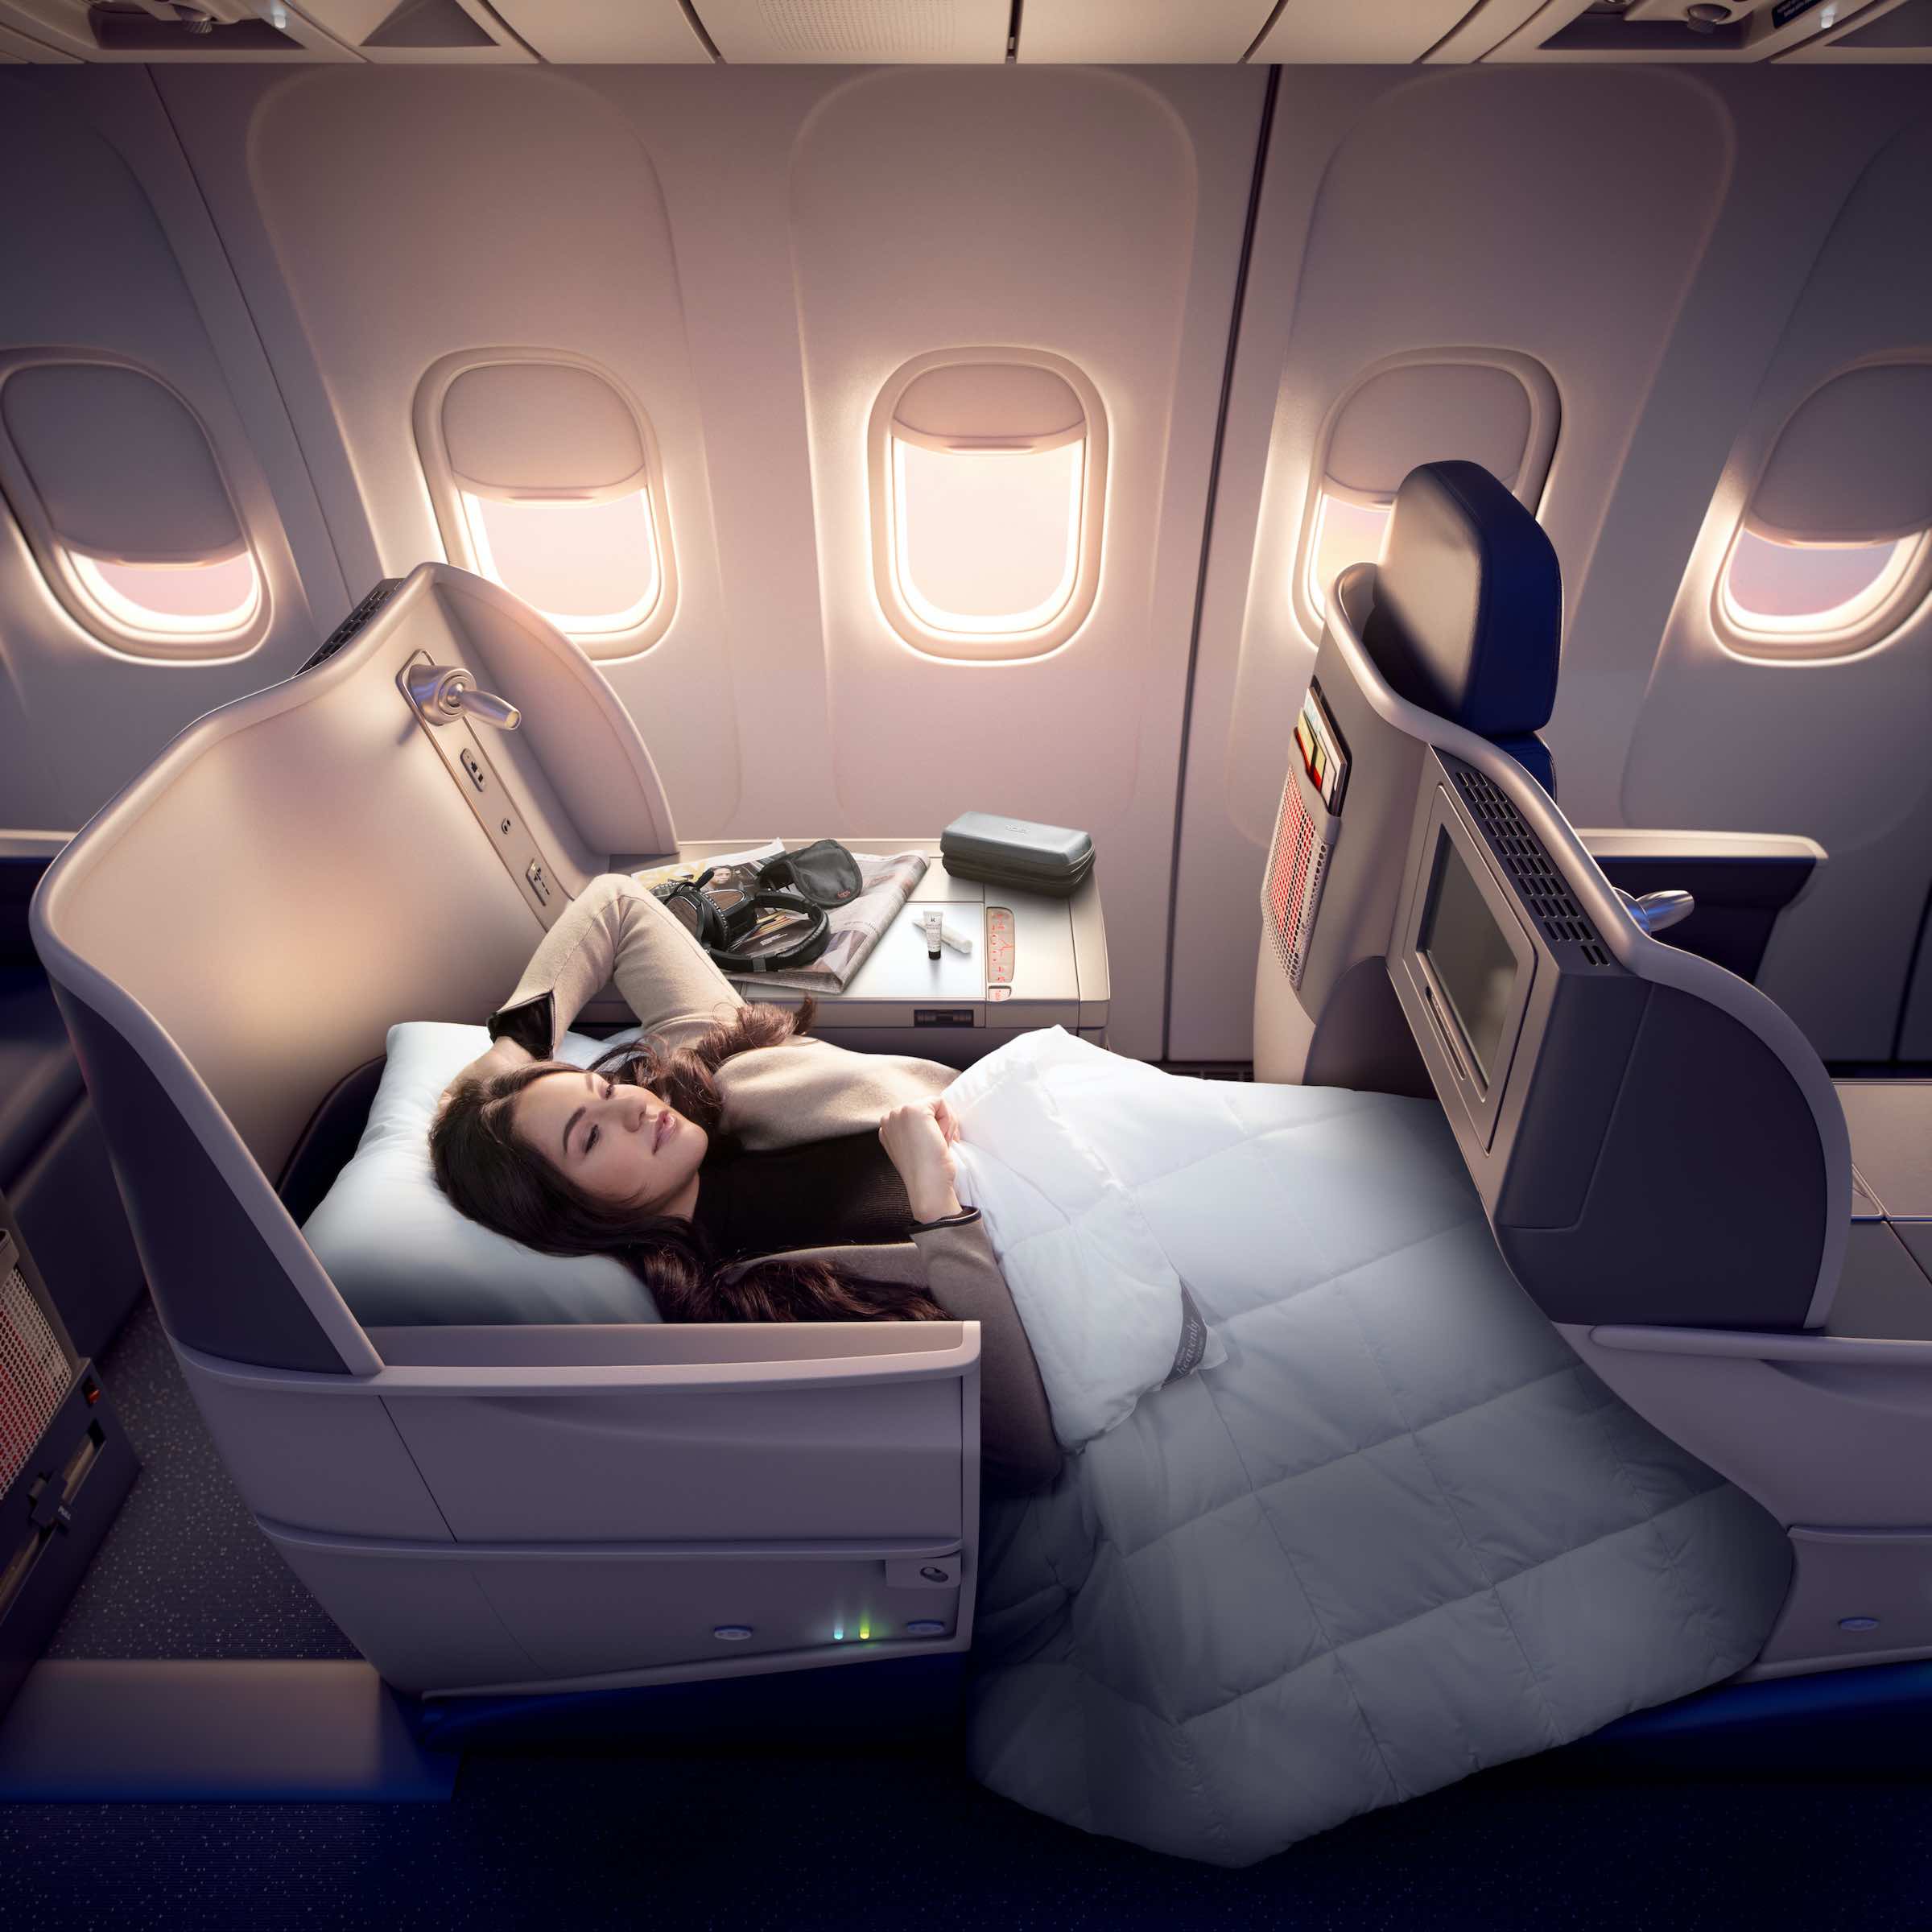 Upgrade “Sale” At Delta Air Lines: Only 499,500 Miles For Business Class Upgrade..